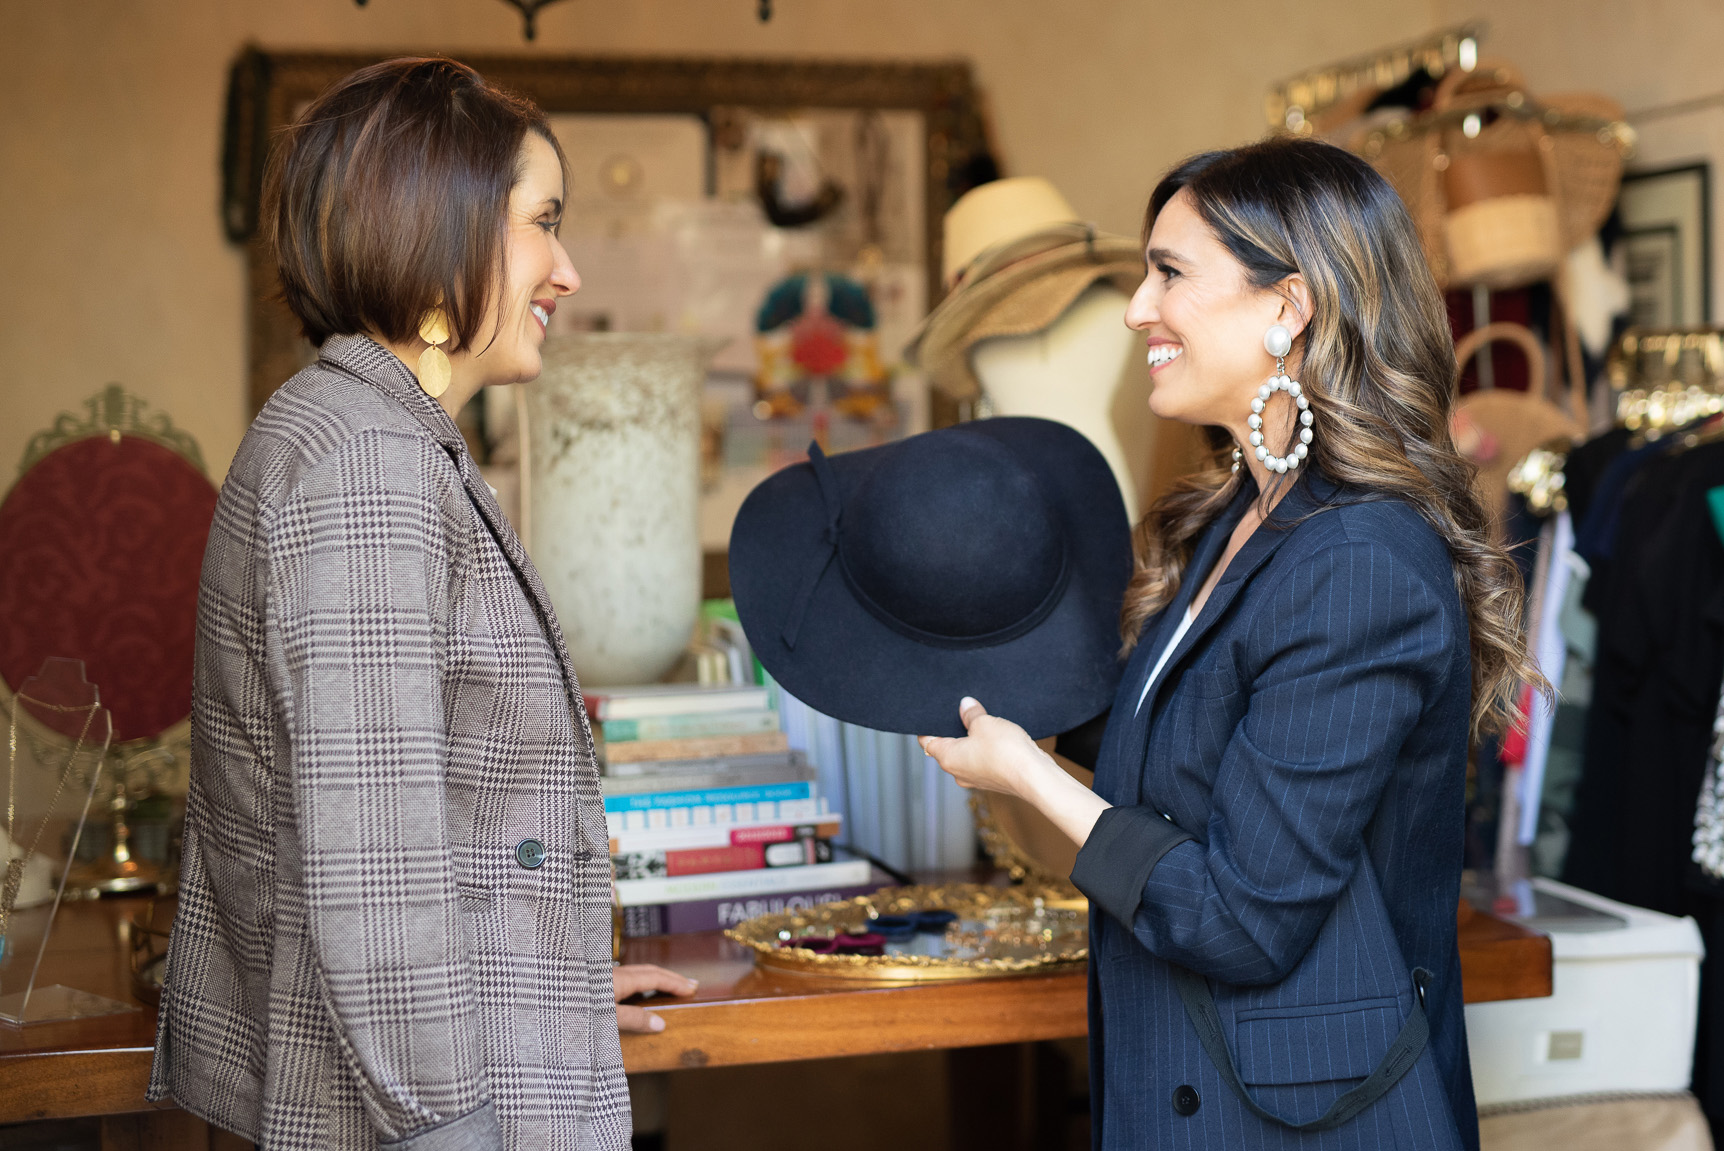 Christine Vartanian standing in a room with racks of clothing and a mirror behind her, wearing a navy blue blazer and large circular pearl earrings, holding a black sun hat, standing in front of a women customer wearing a plaid blazer with gold teardrop earrings